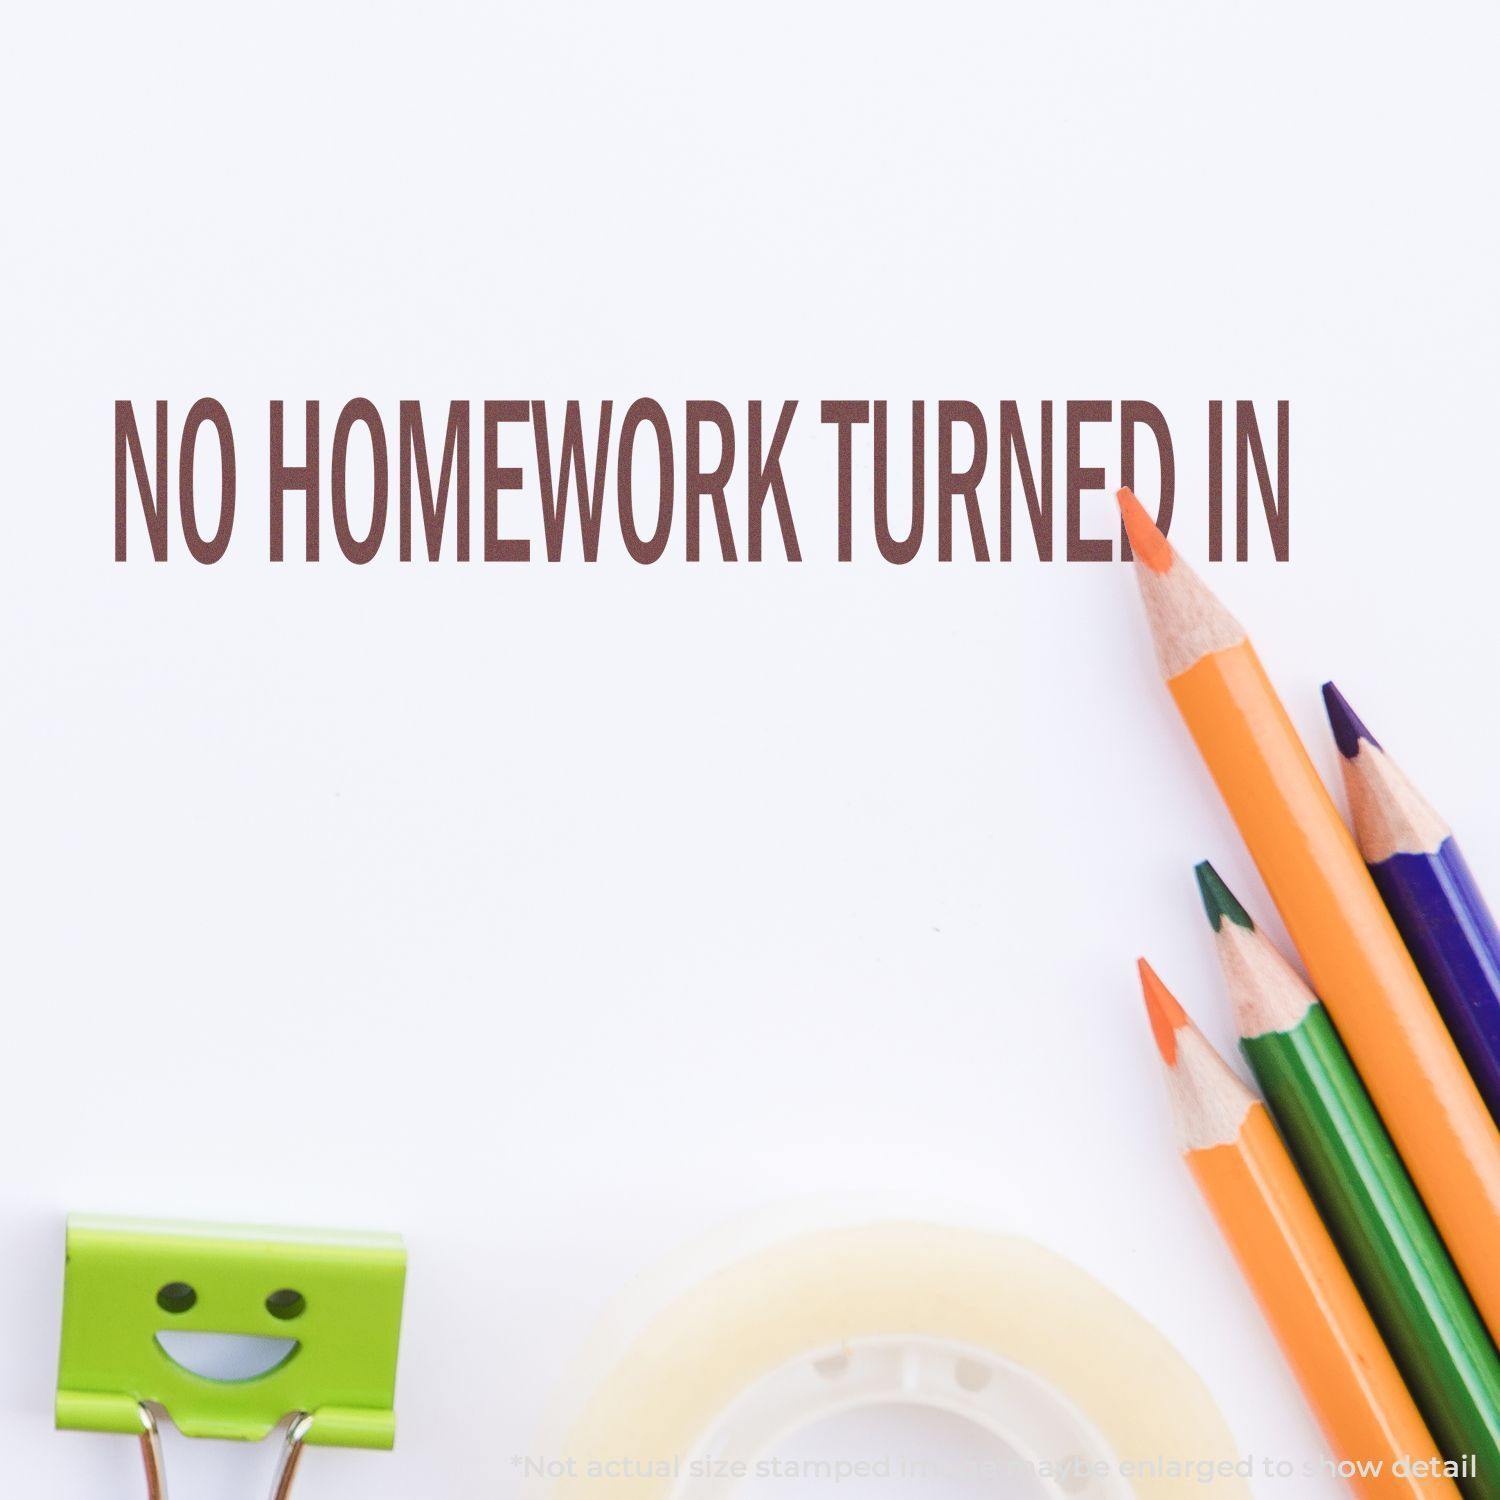 In Use Large No Homework Turned In Rubber Stamp Image